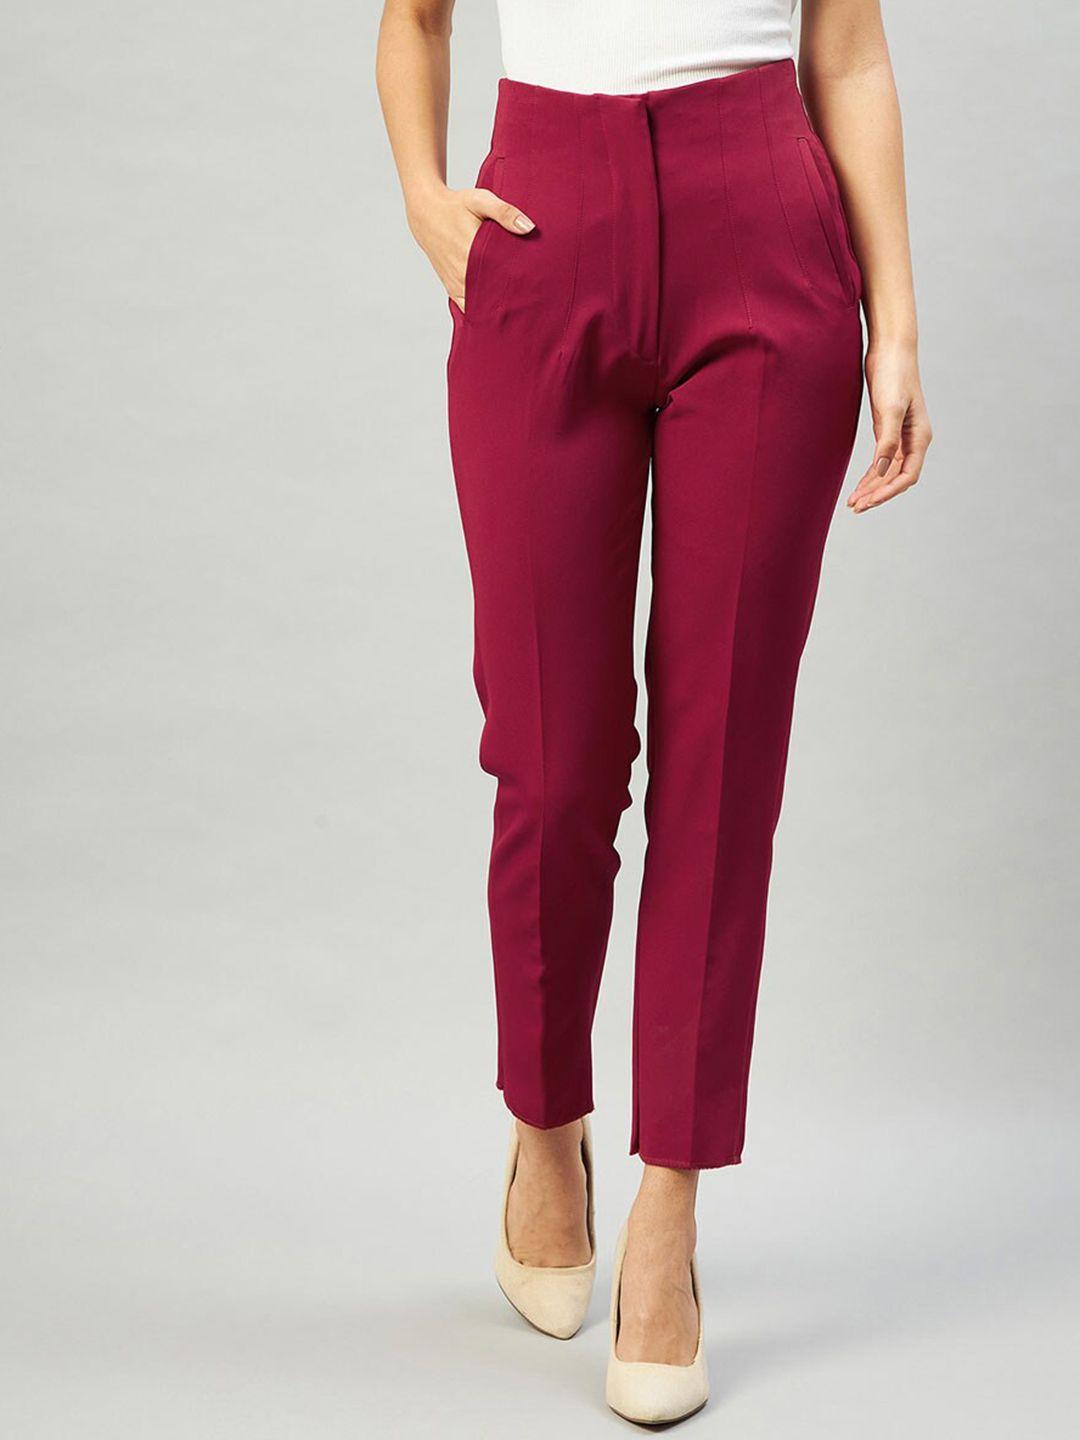 delan women relaxed slim fit high-rise easy wash trousers